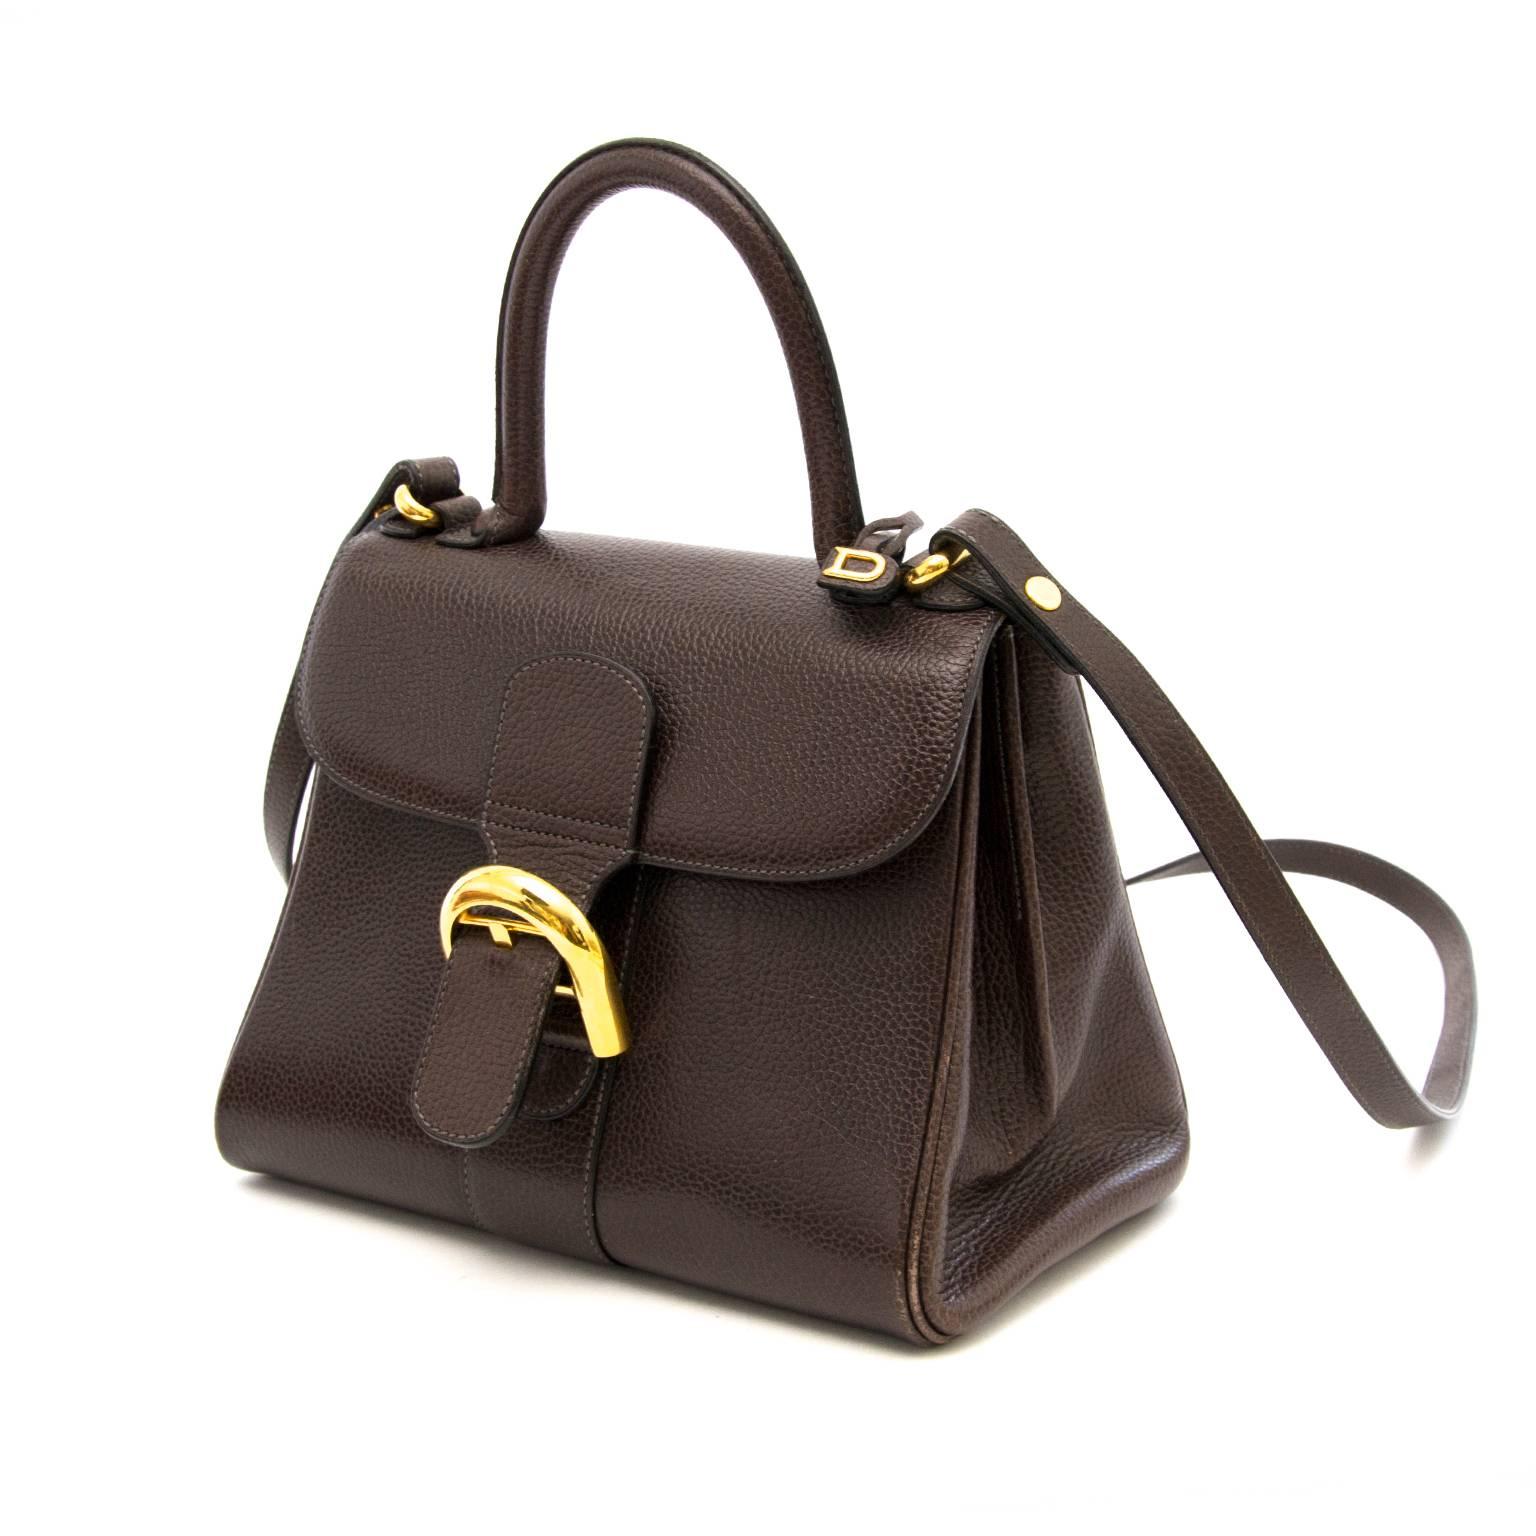 Delvaux Brillant in brown leather with gold hardware. The Brillant is an iconic and timeless bag every woman should have in her closet. The bag comes with a strap and a zipper pocket on the inside. It closes with the horseshoe-shaped buckle. Comes